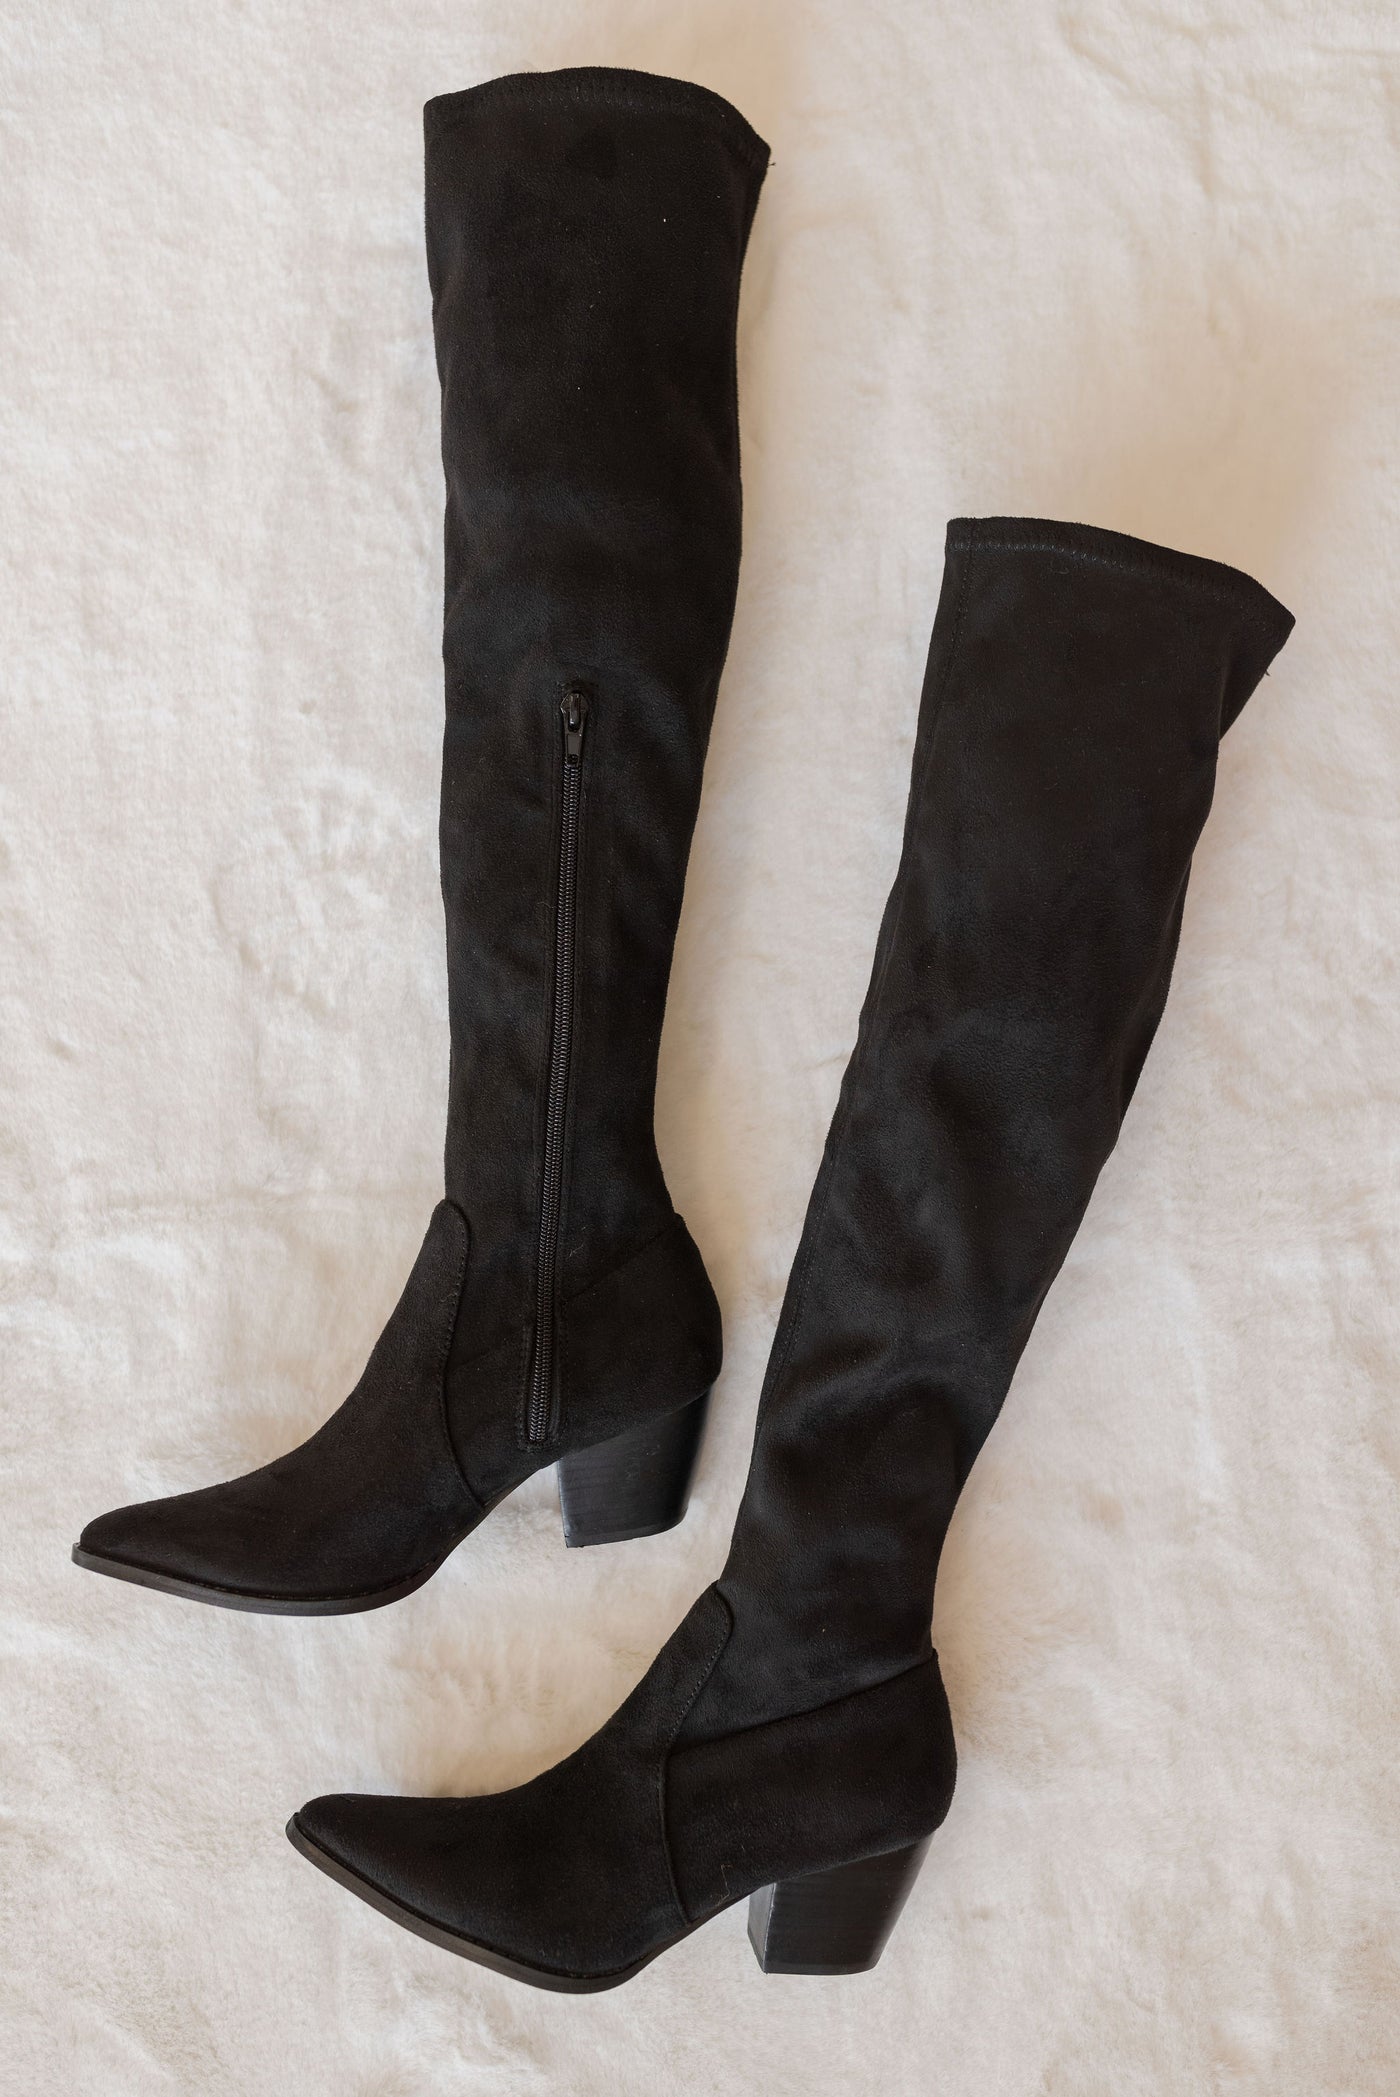 Matisse | Broadway Over-the-Knee Boot | Black - Poppy and Stella